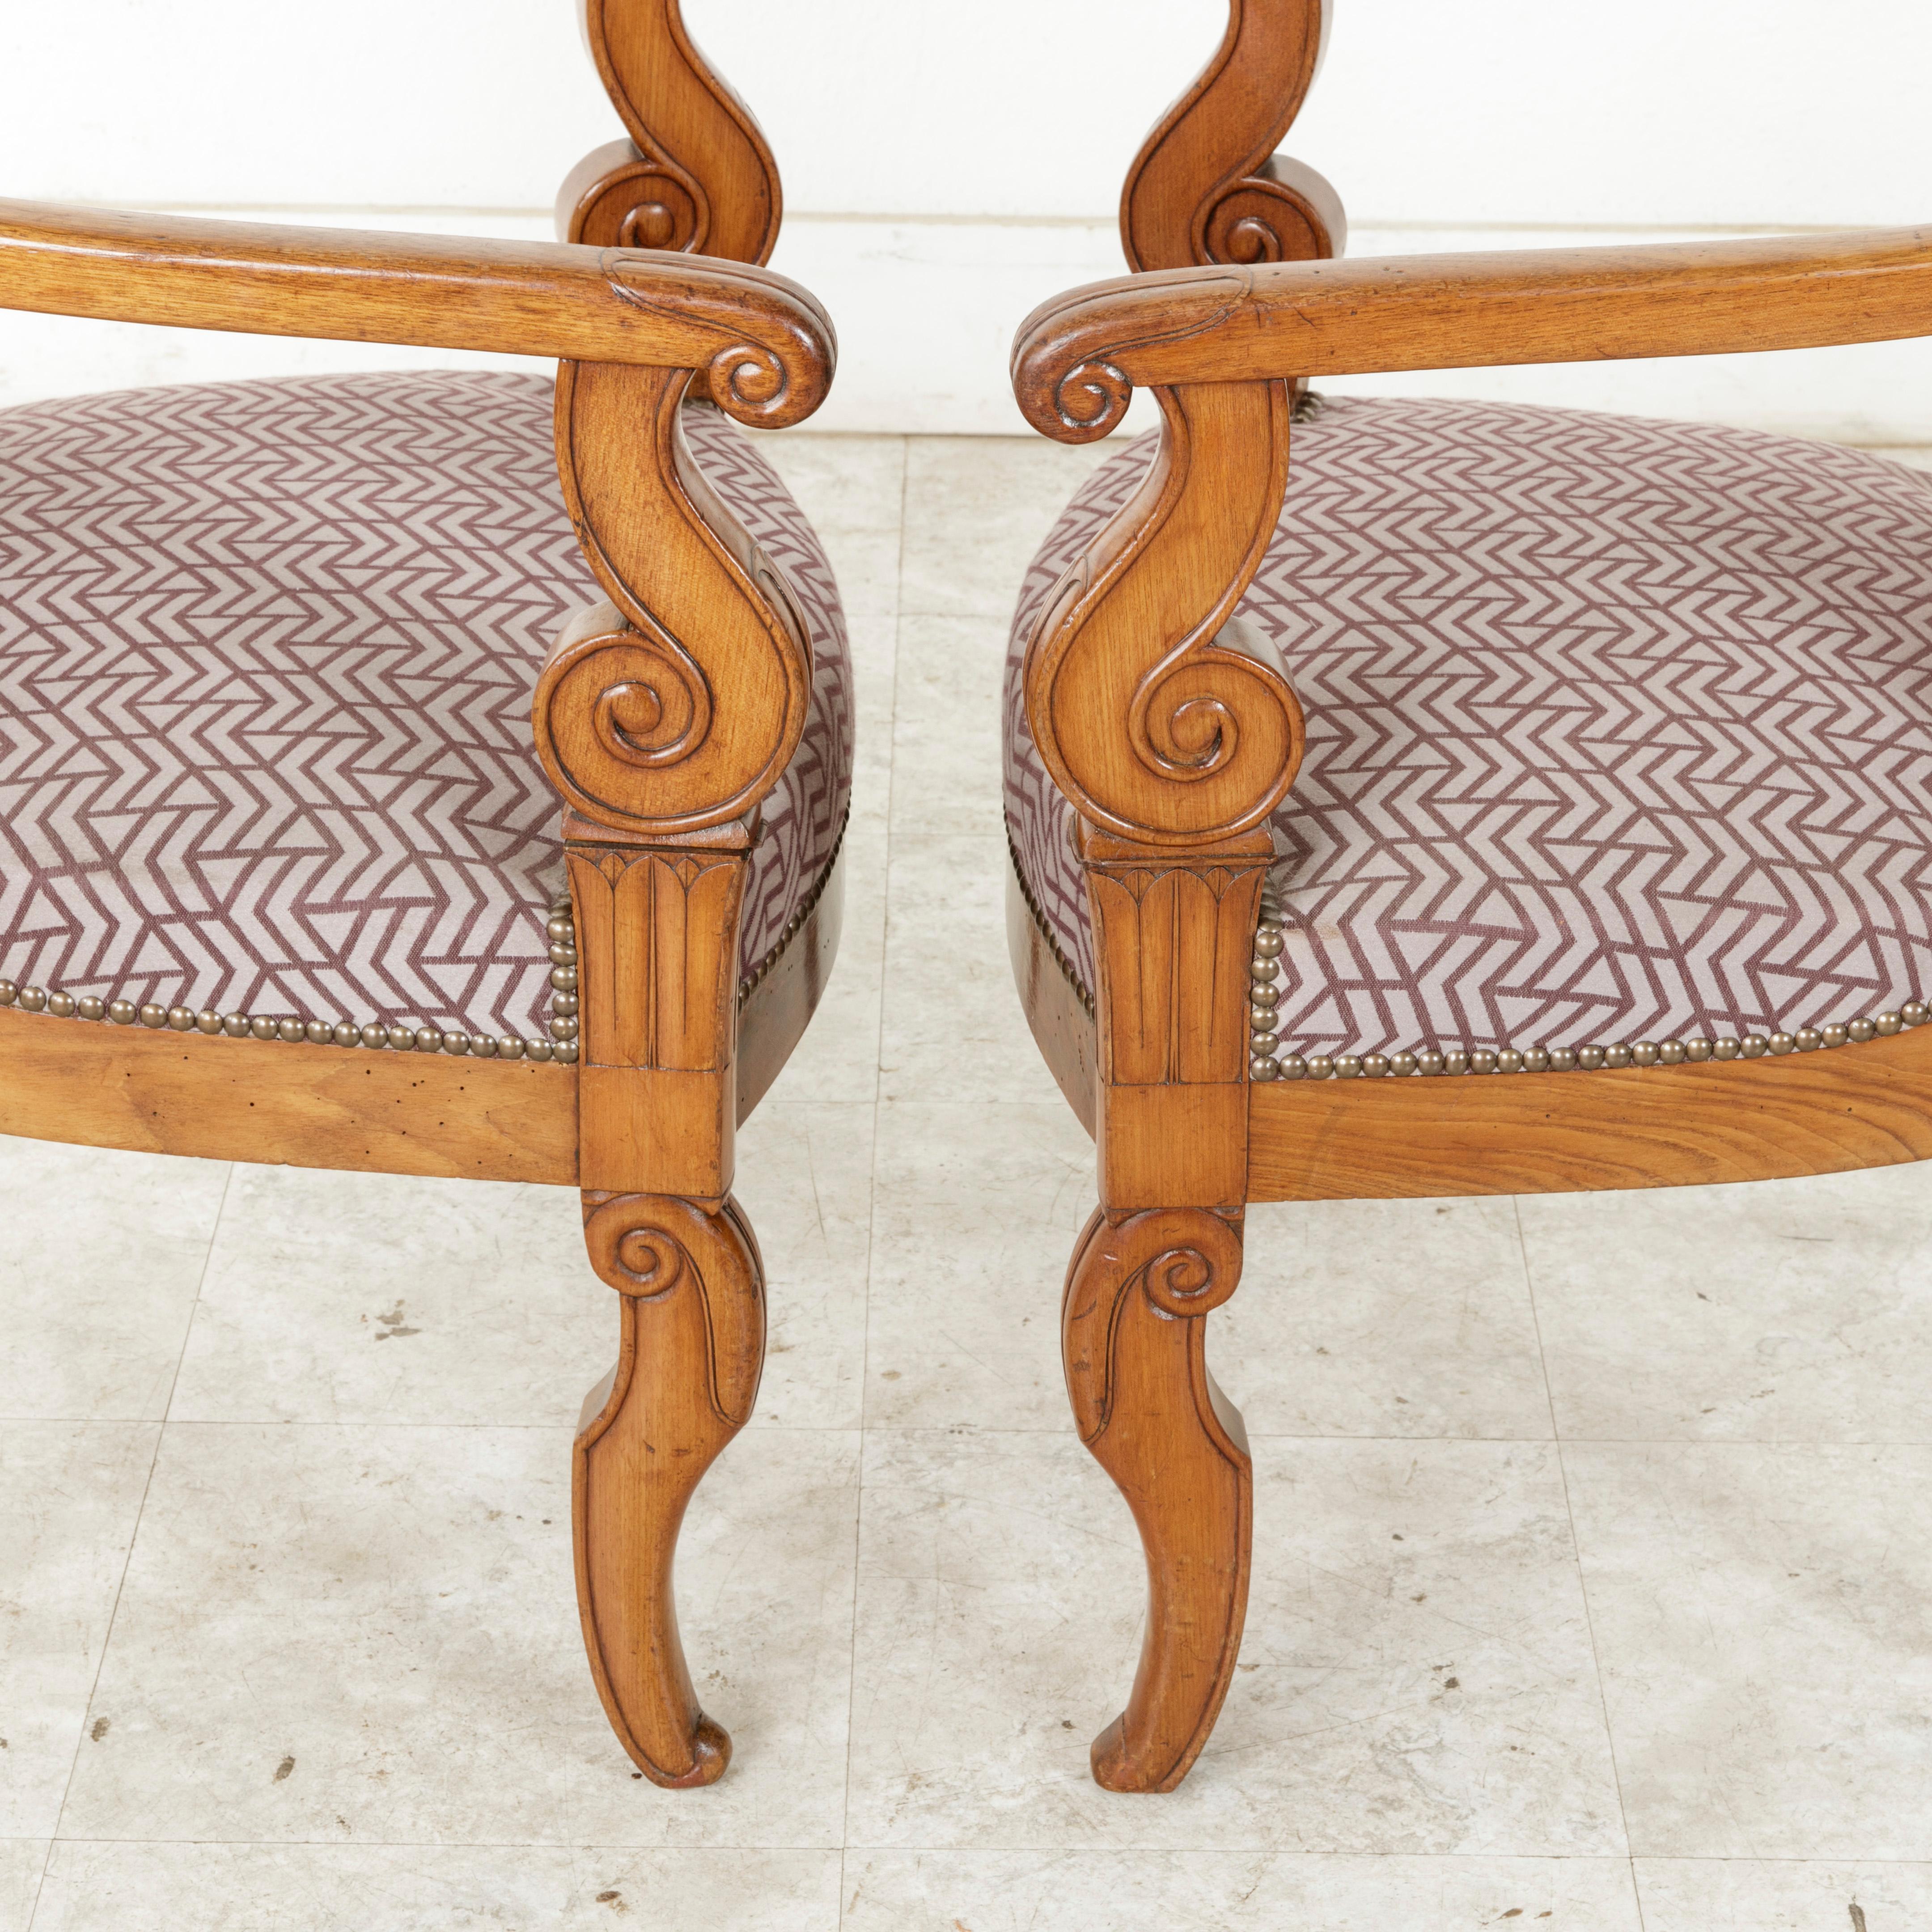 Pair of Mid-19th Century French Restauration Period Walnut Armchairs or Bergeres 7